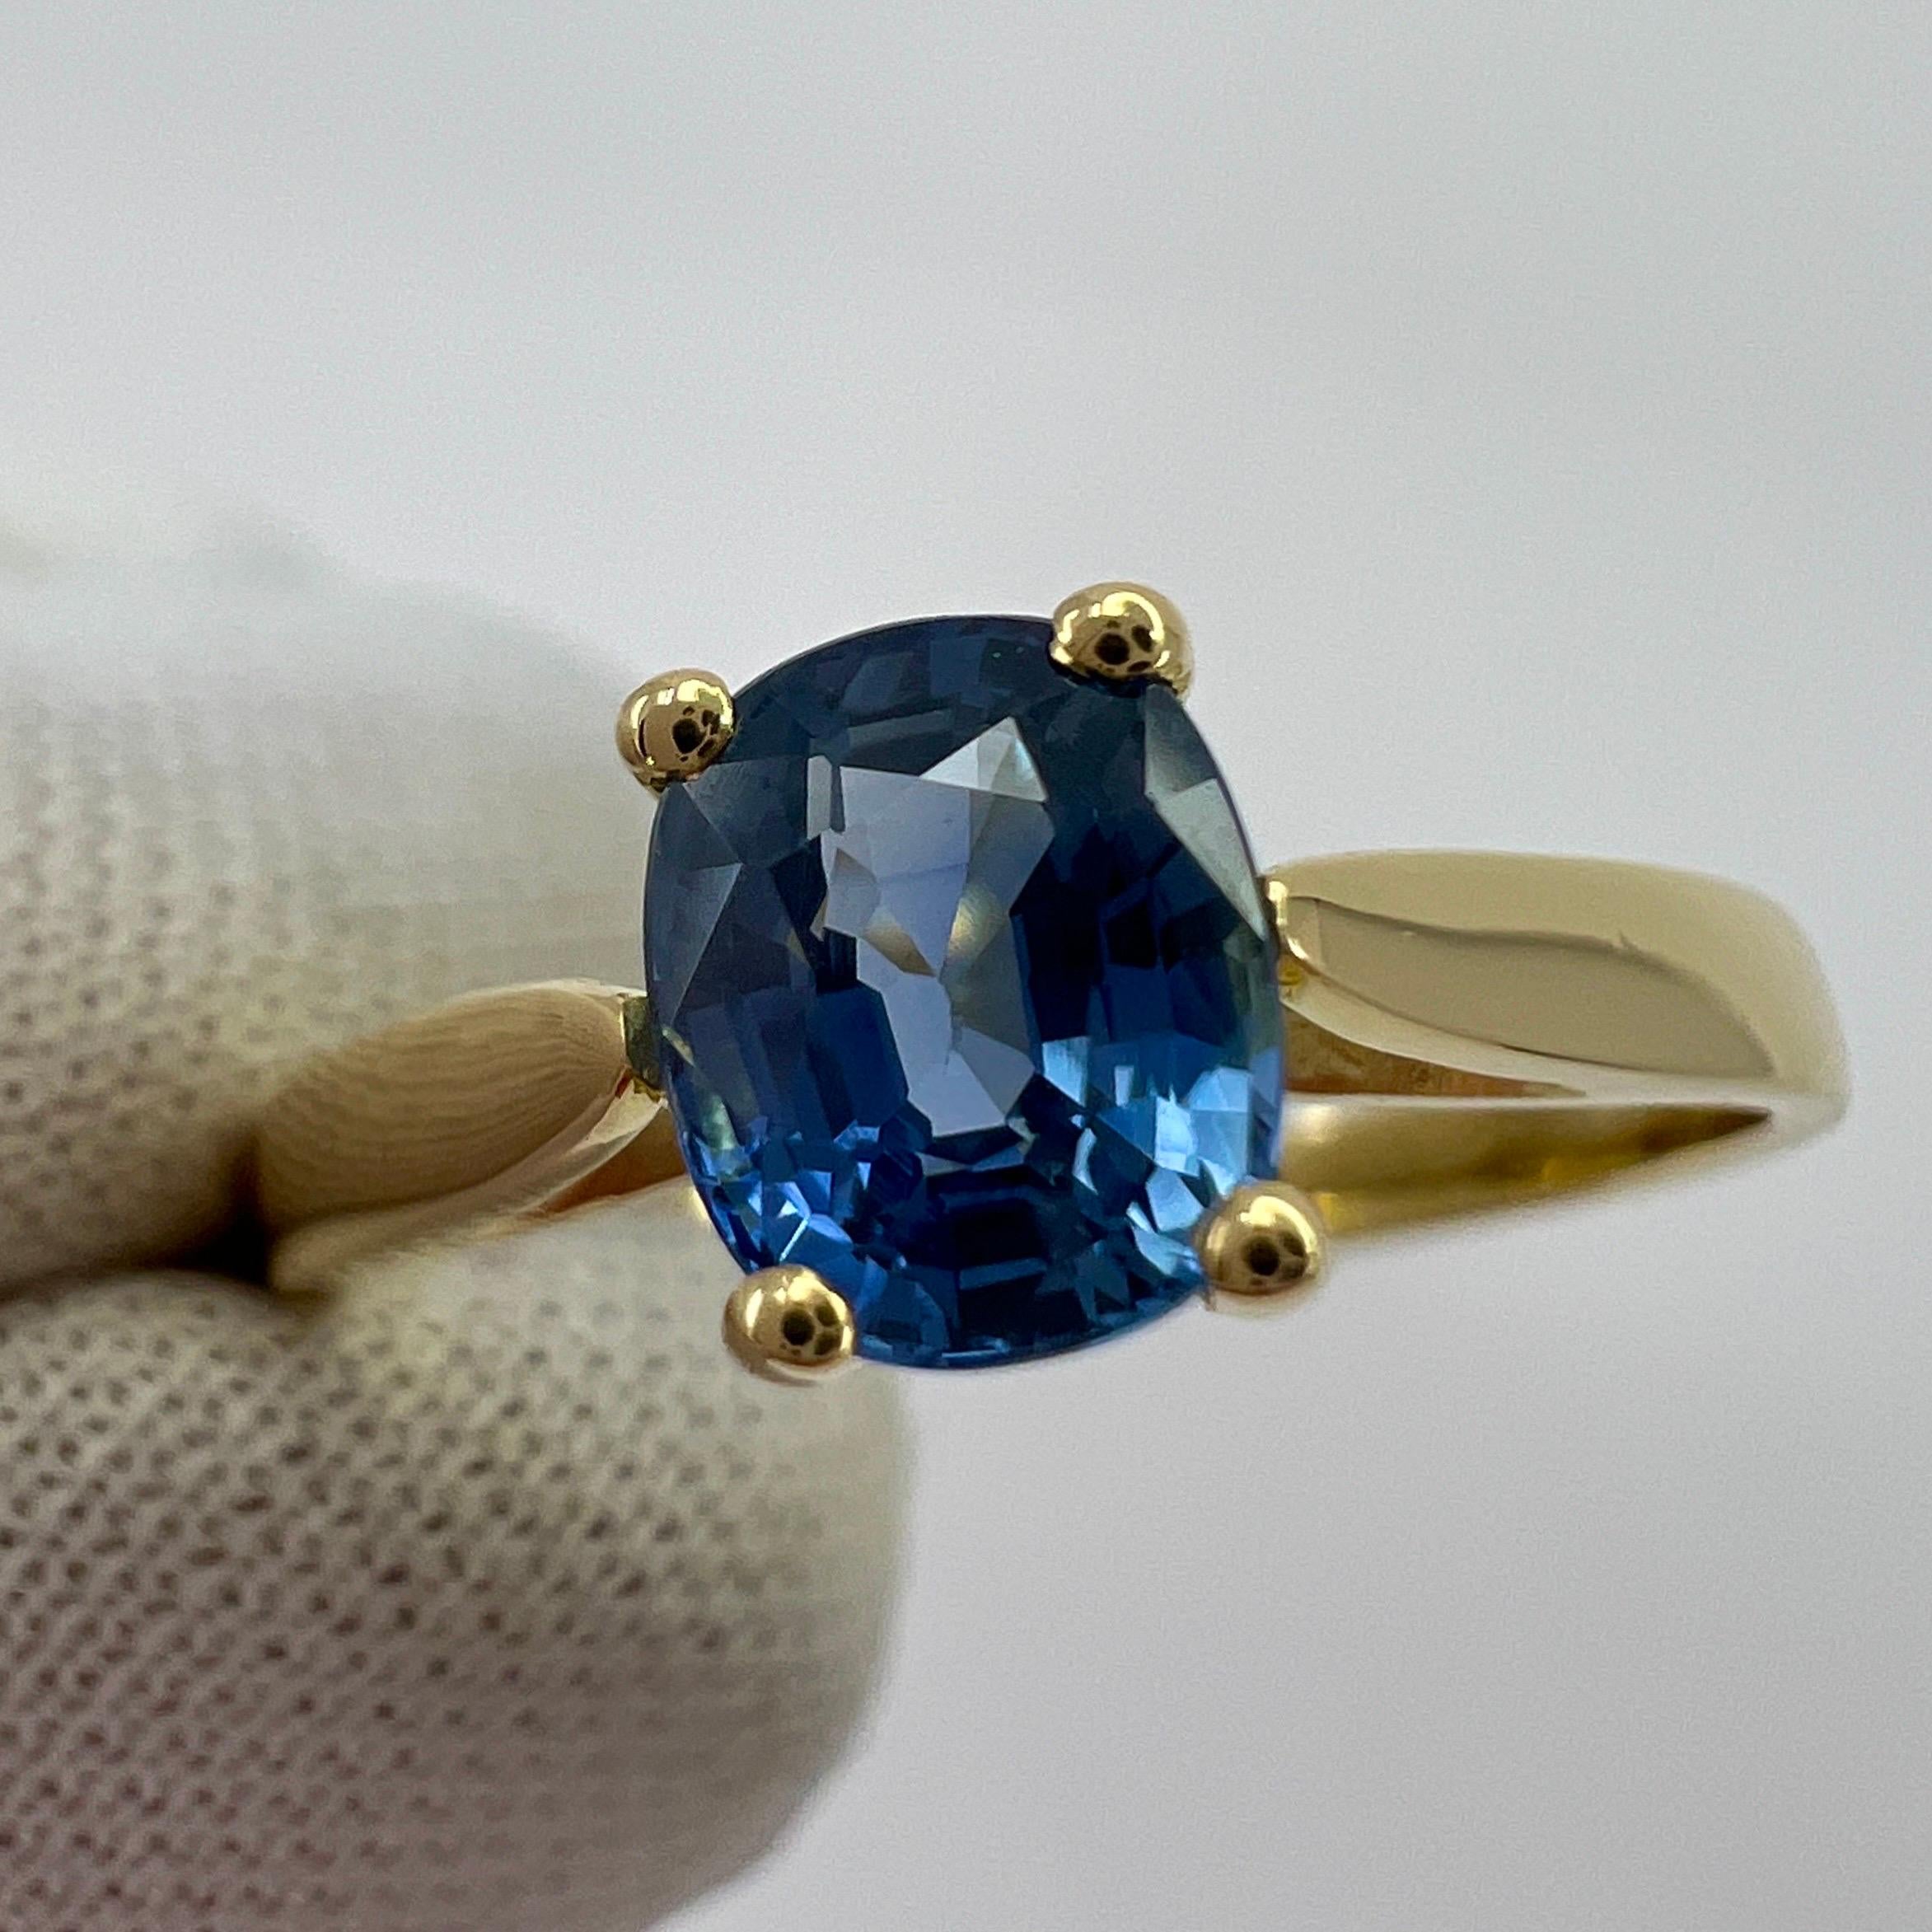 Fine Cornflower Blue Ceylon Sapphire Cushion Cut 18k Yellow Gold Solitaire Ring.

1.03 Carat sapphire with a stunning bright cornflower blue colour and excellent clarity. Very clean stone, practically flawless.
Also has an excellent cushion cut